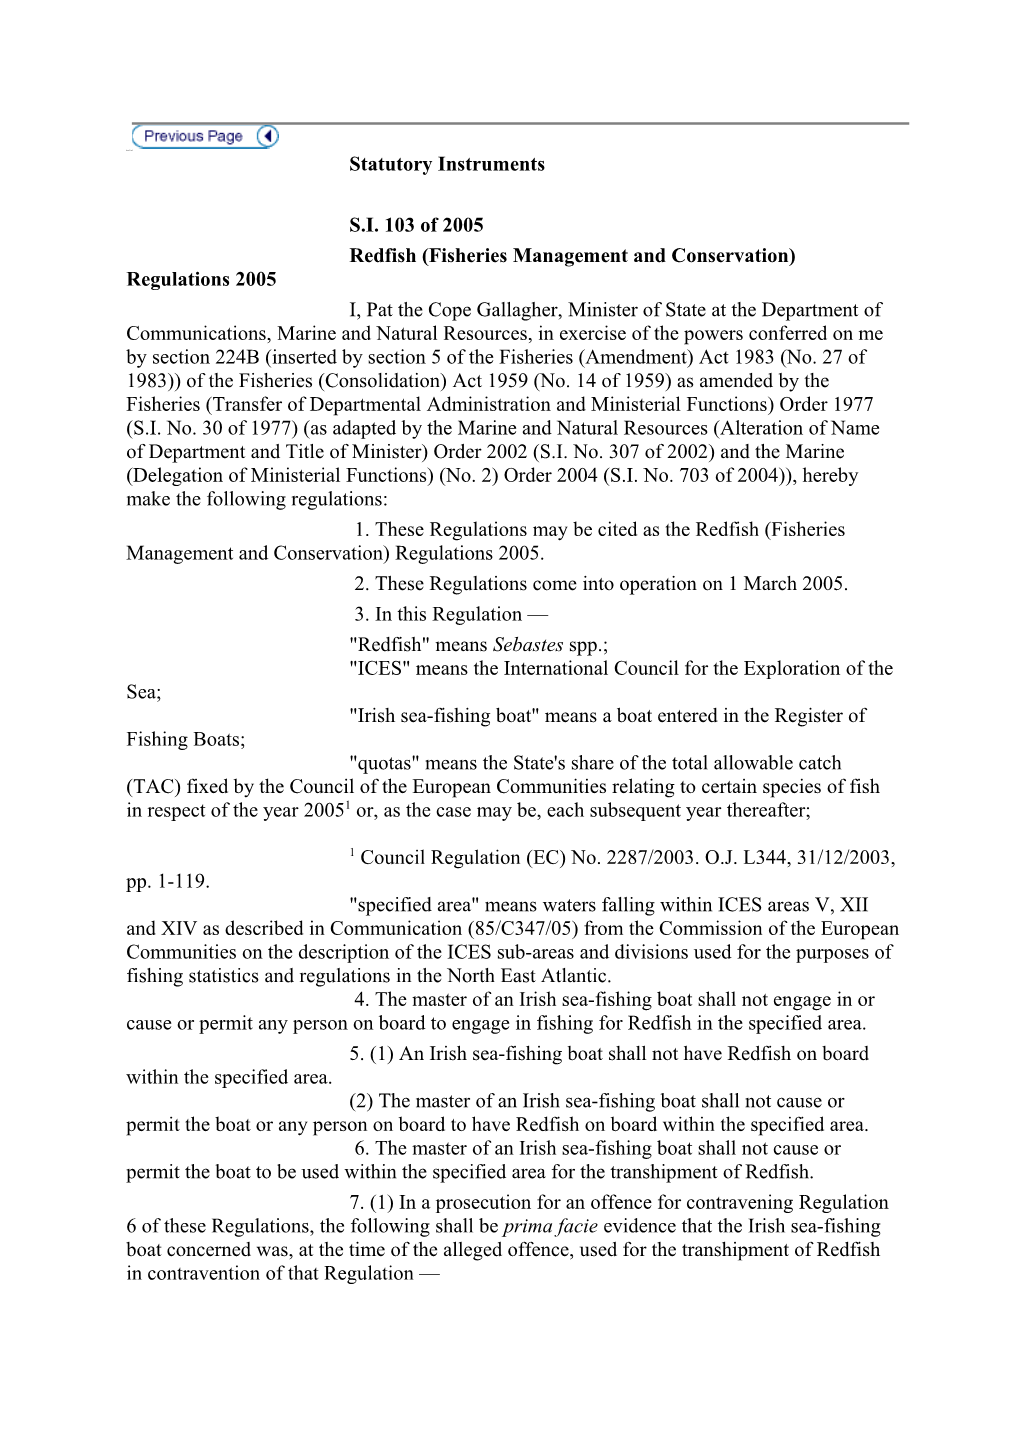 Redfish (Fisheries Management and Conservation) Regulations 2005